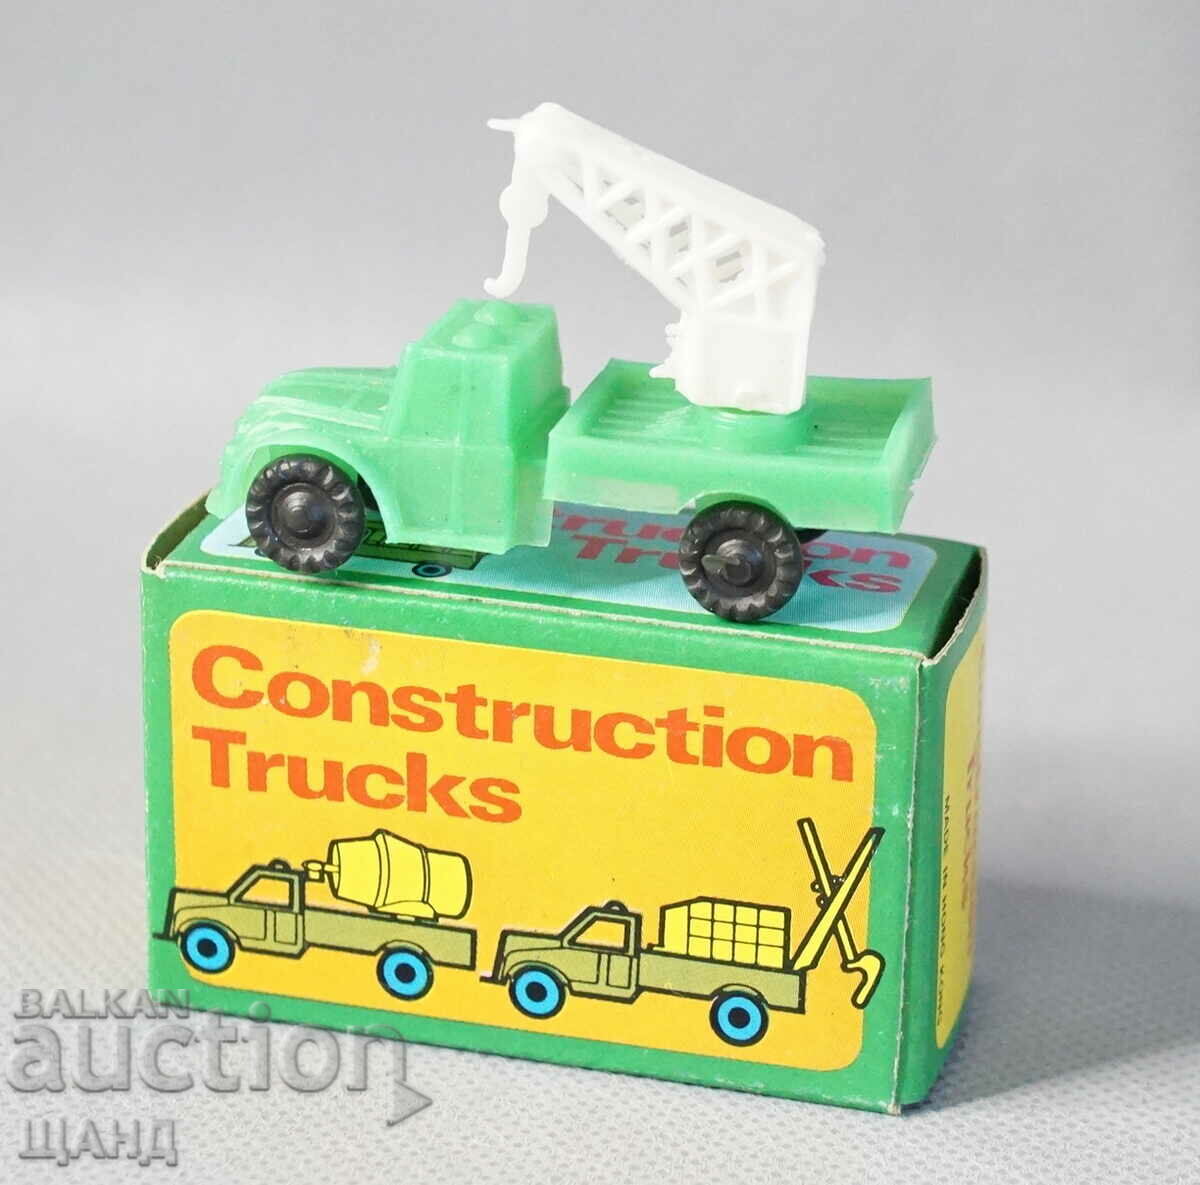 Old Soc plastic toy model truck crane with box